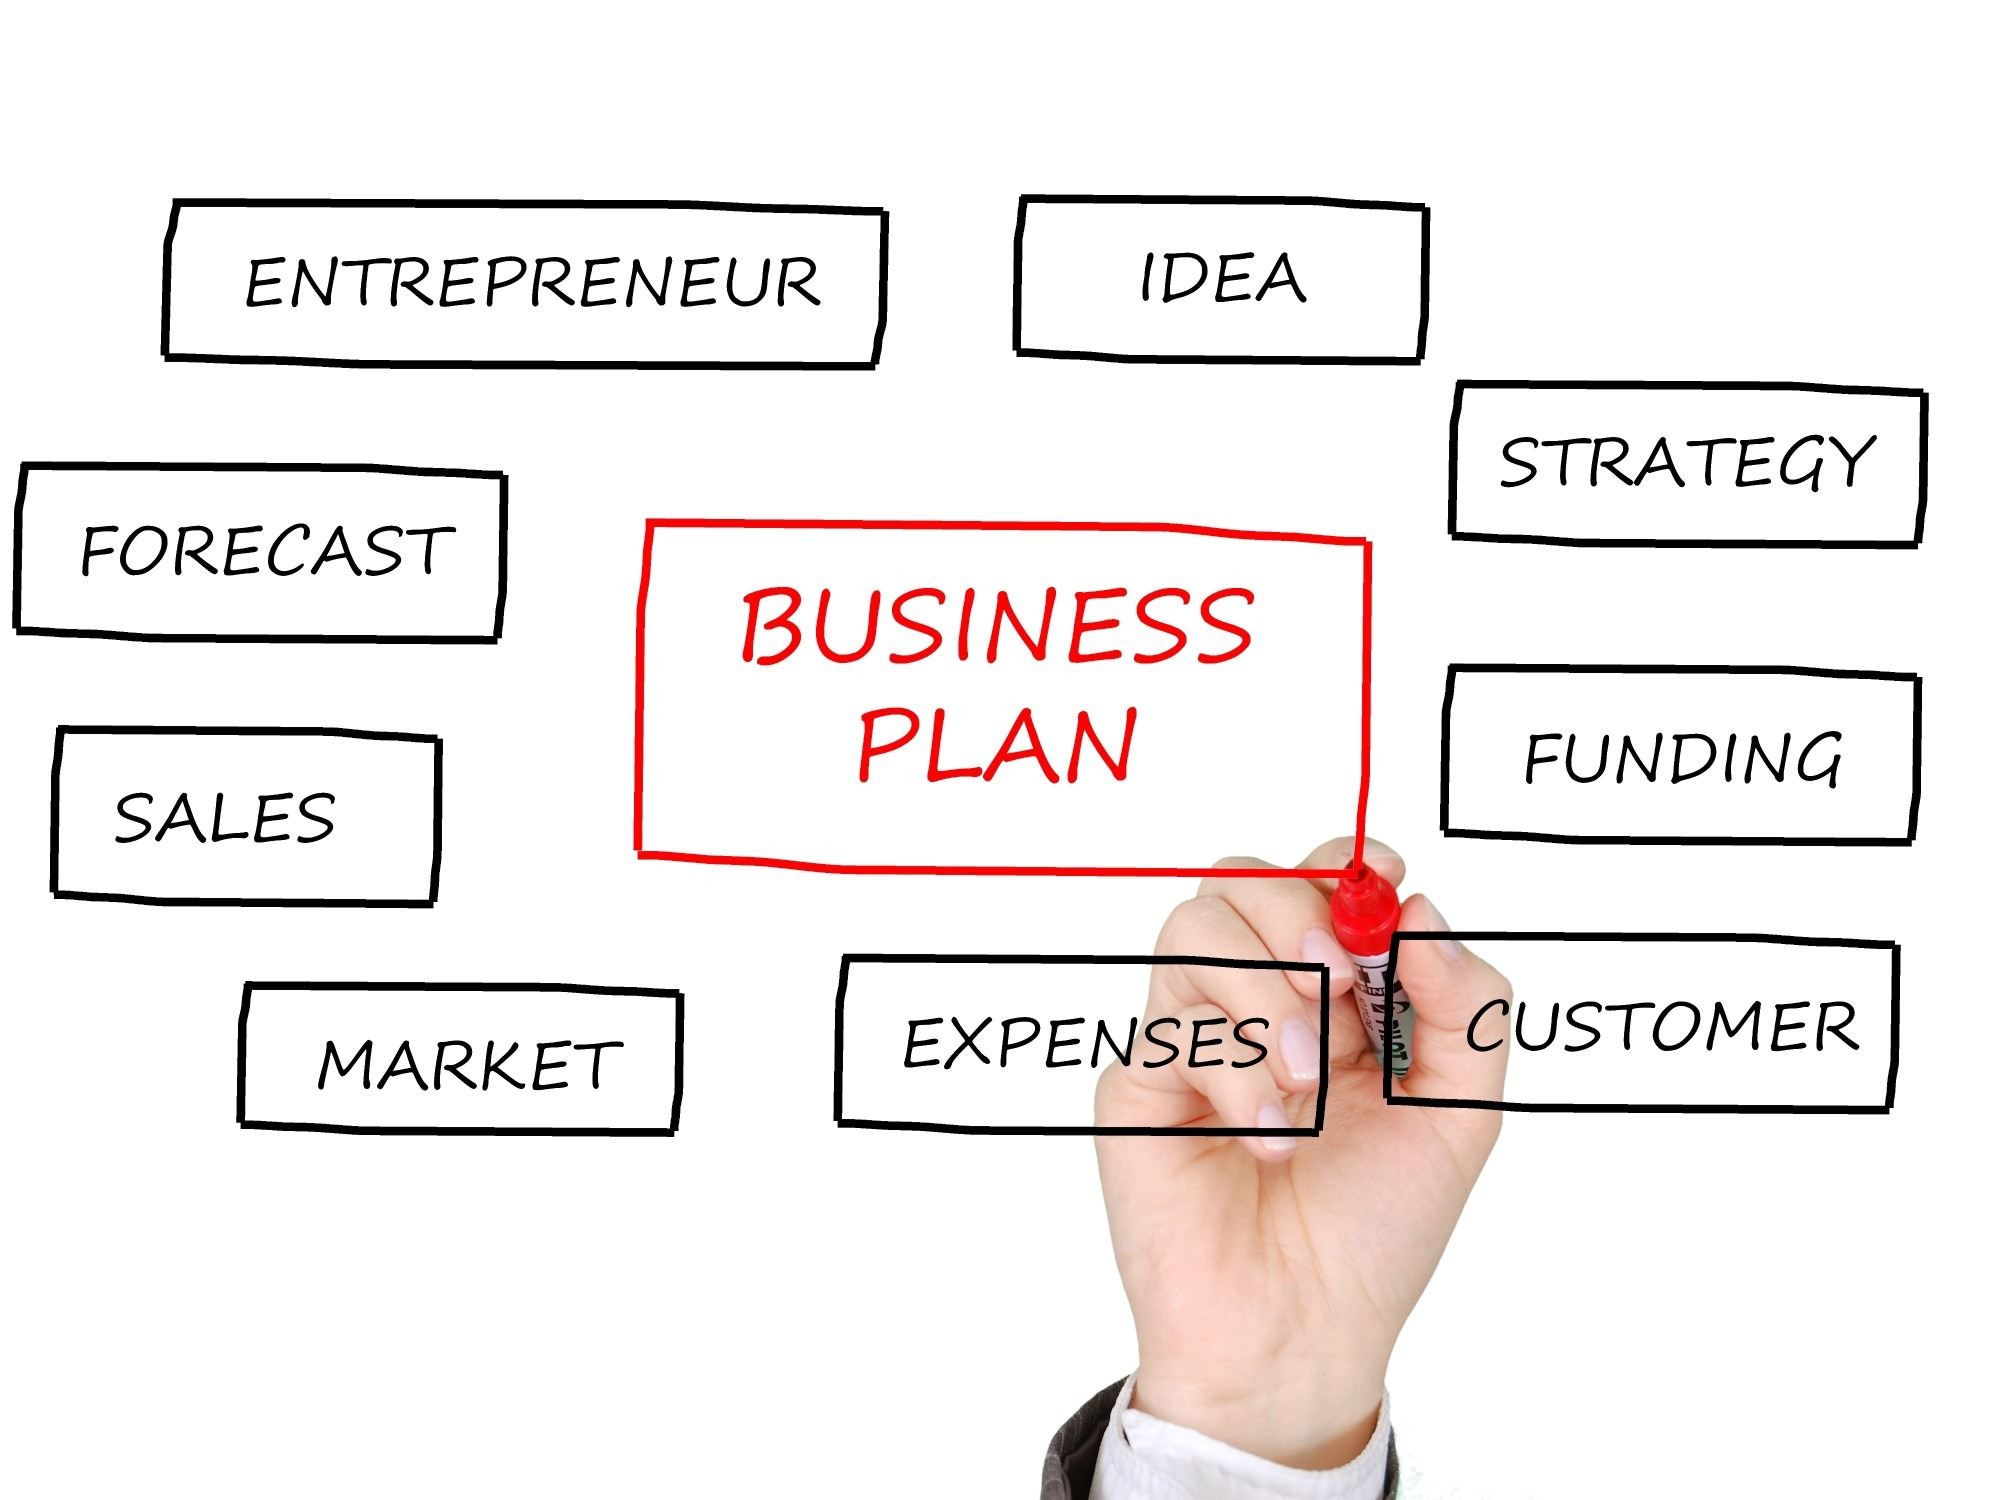 an essential part of business plan is